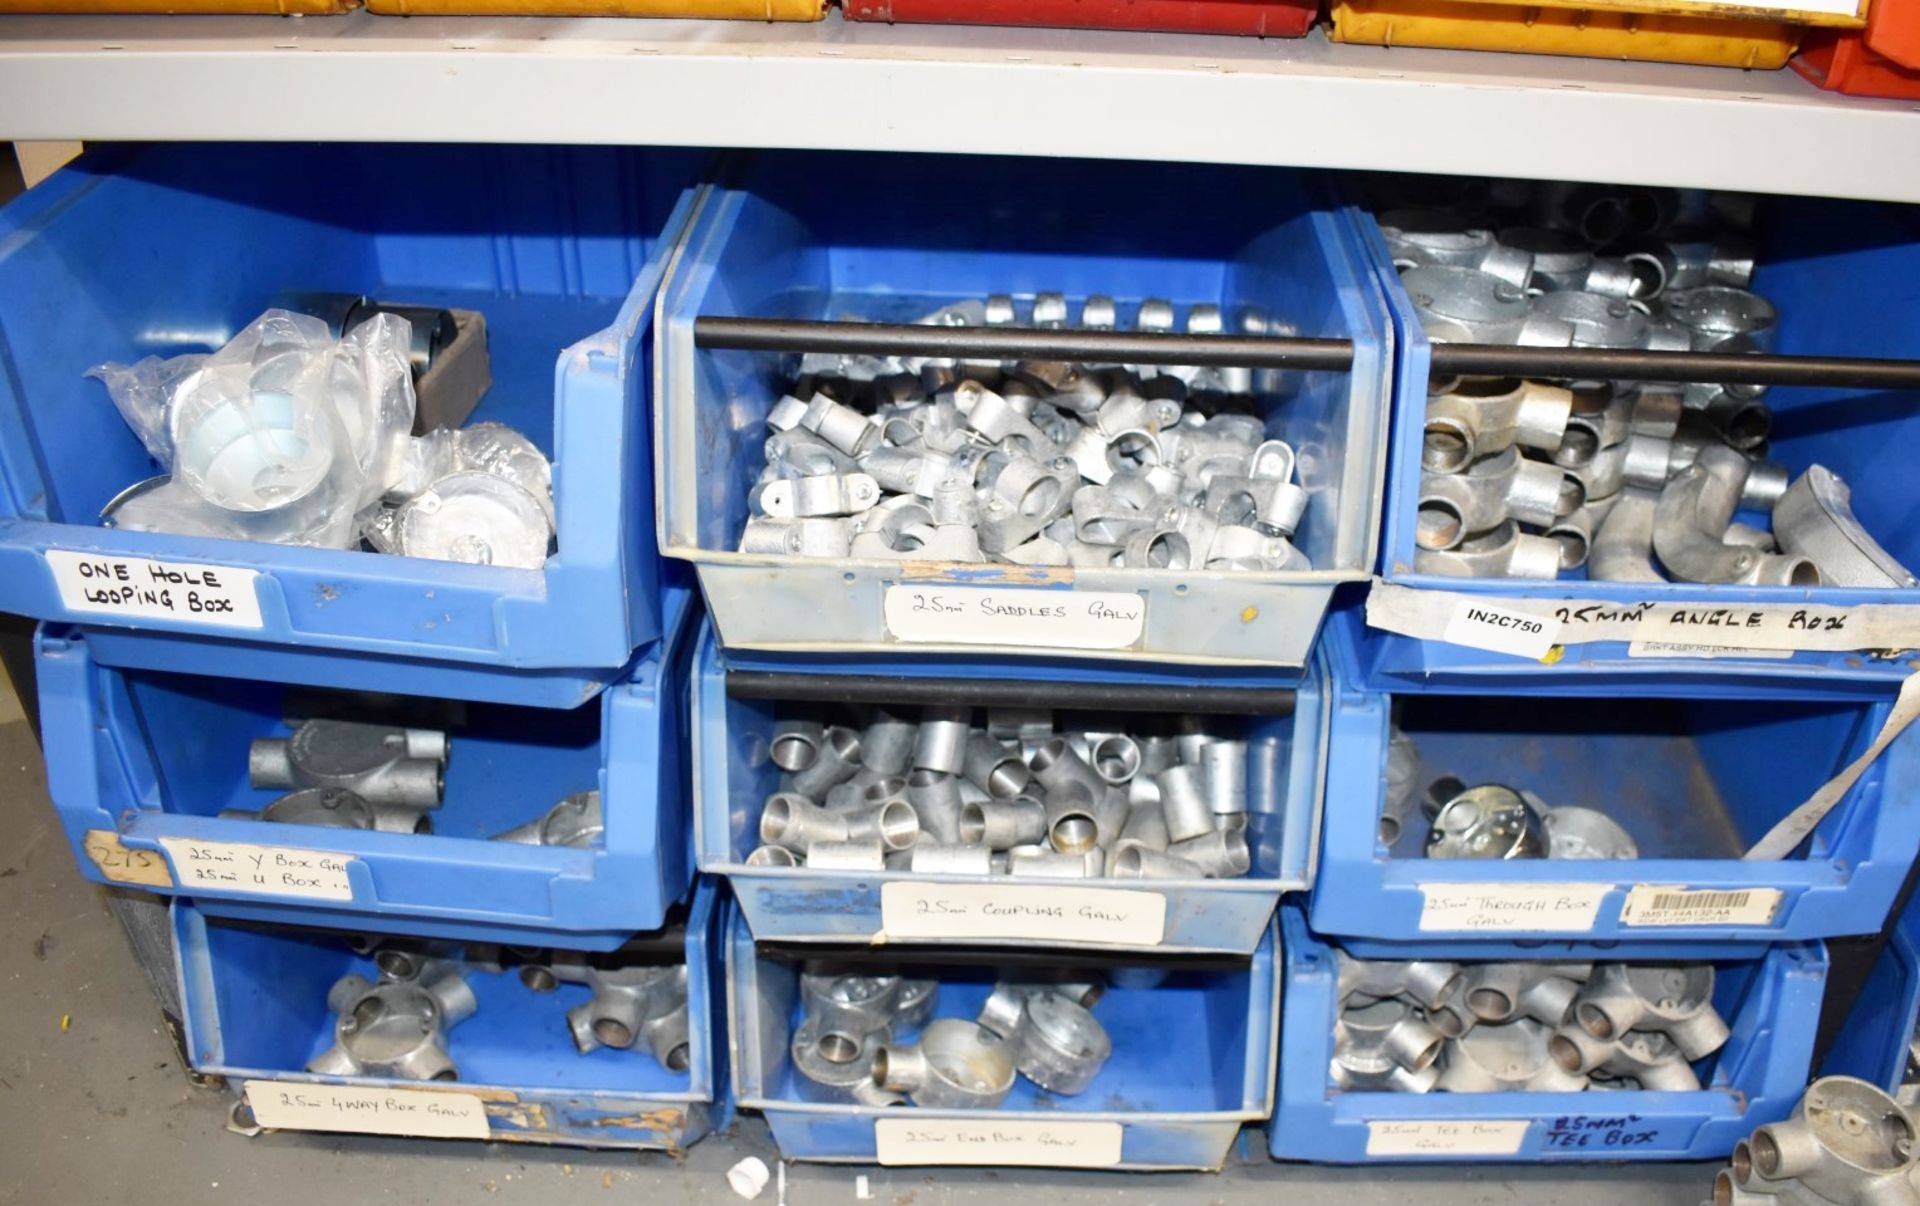 29 x Linbins & Contents & Boxed Stock - Galvanised Conduit Fittings, Brass Bushes, Switches & More - Image 6 of 16